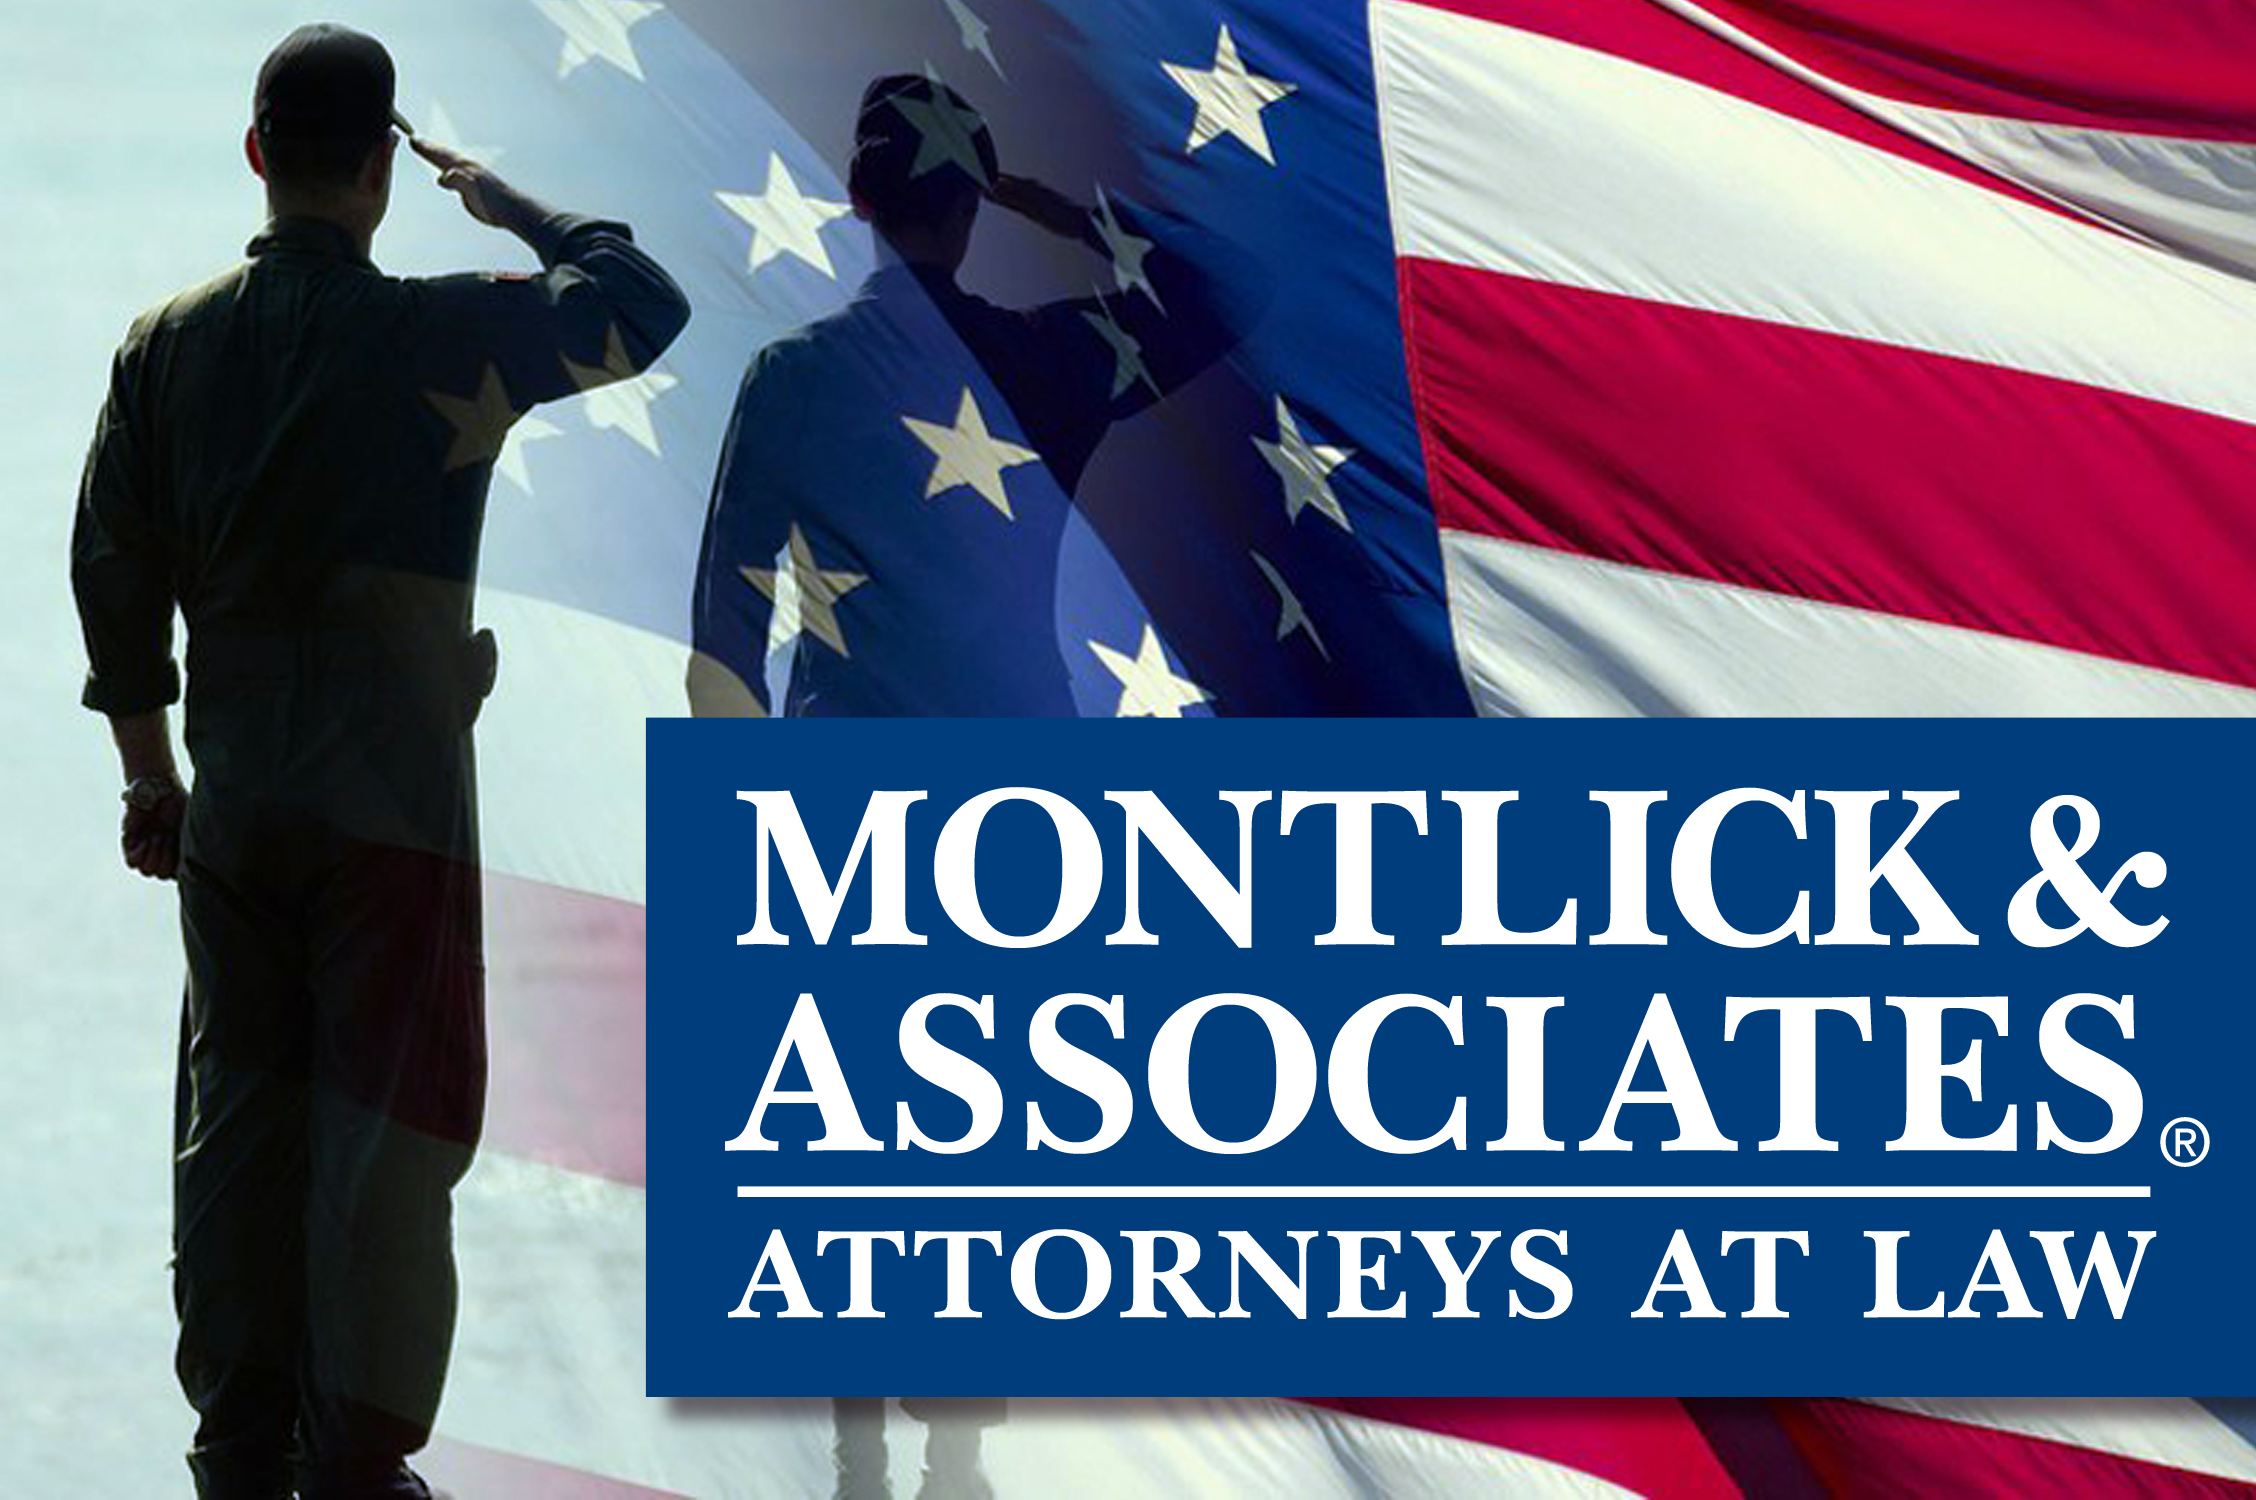 Georgia Personal Injury Attorneys MONTLICK & ASSOCIATES was named "Most Patriotic Business" by the Association of the U.S. Army for its ongoing programs to support our military families.